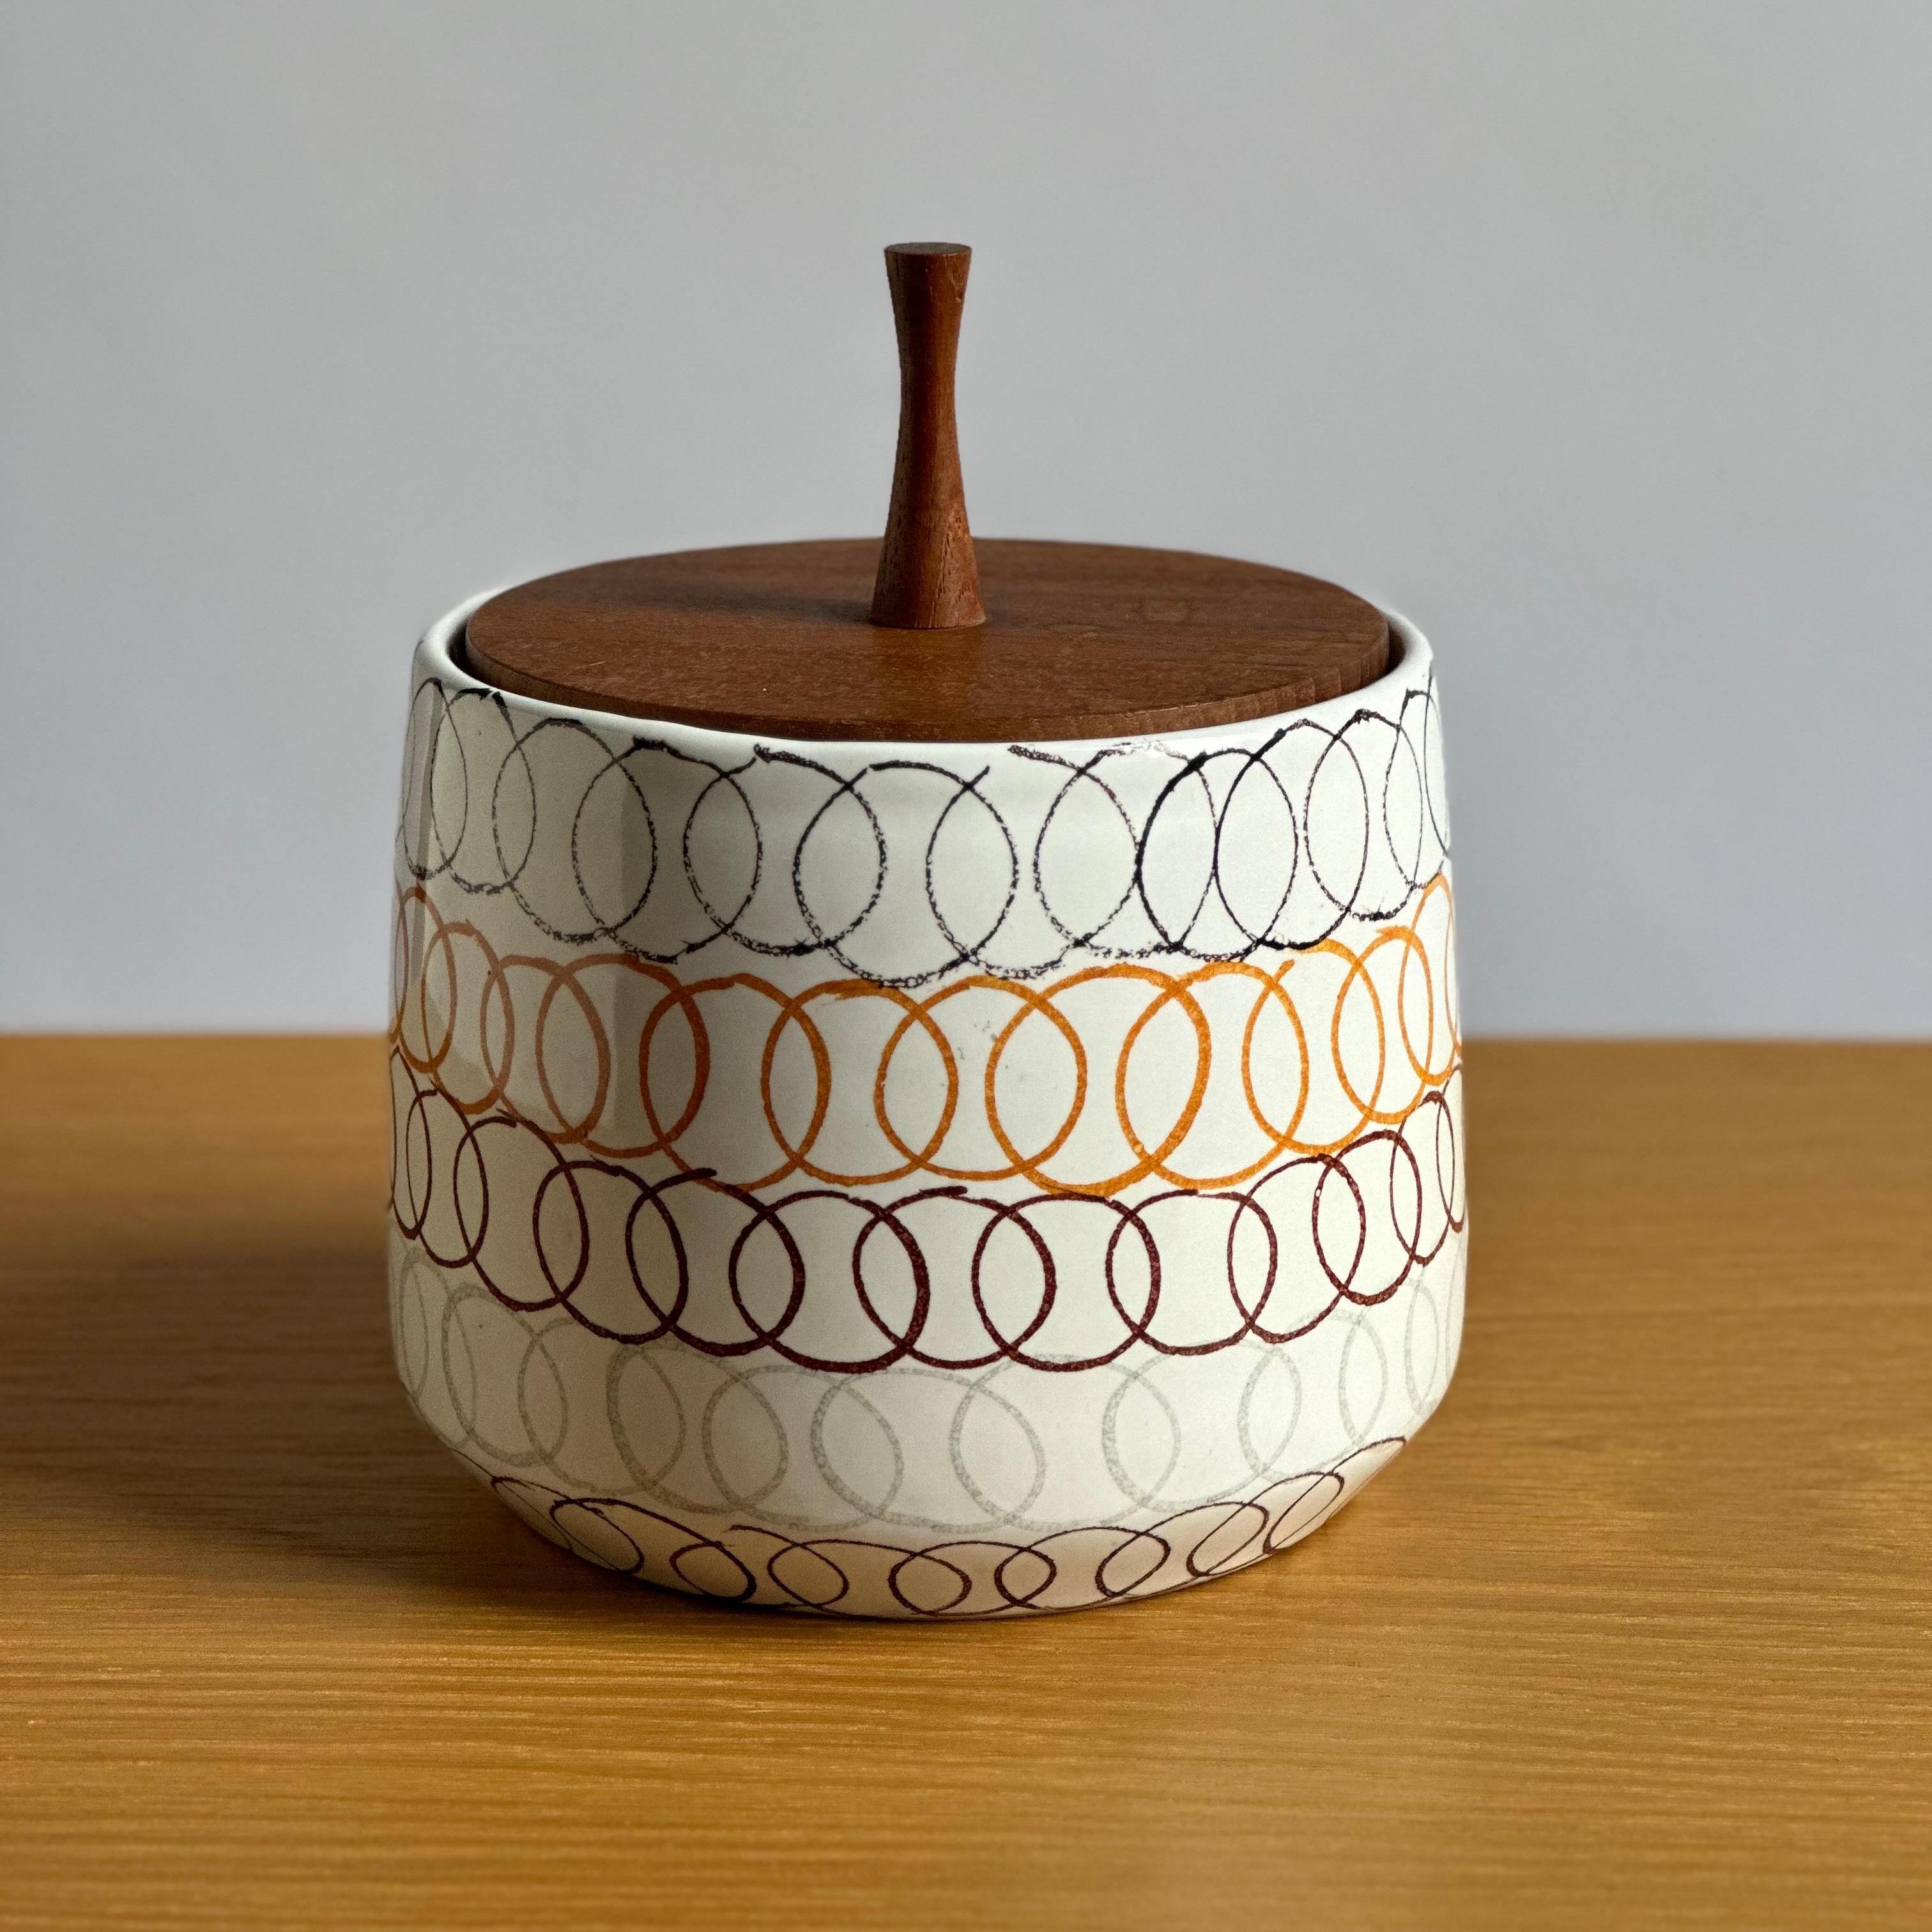 Early (pre 1956) mid-century modern ceramic vessel with walnut lid designed by Aldo Londi for Bitossi. Signed to the underside.